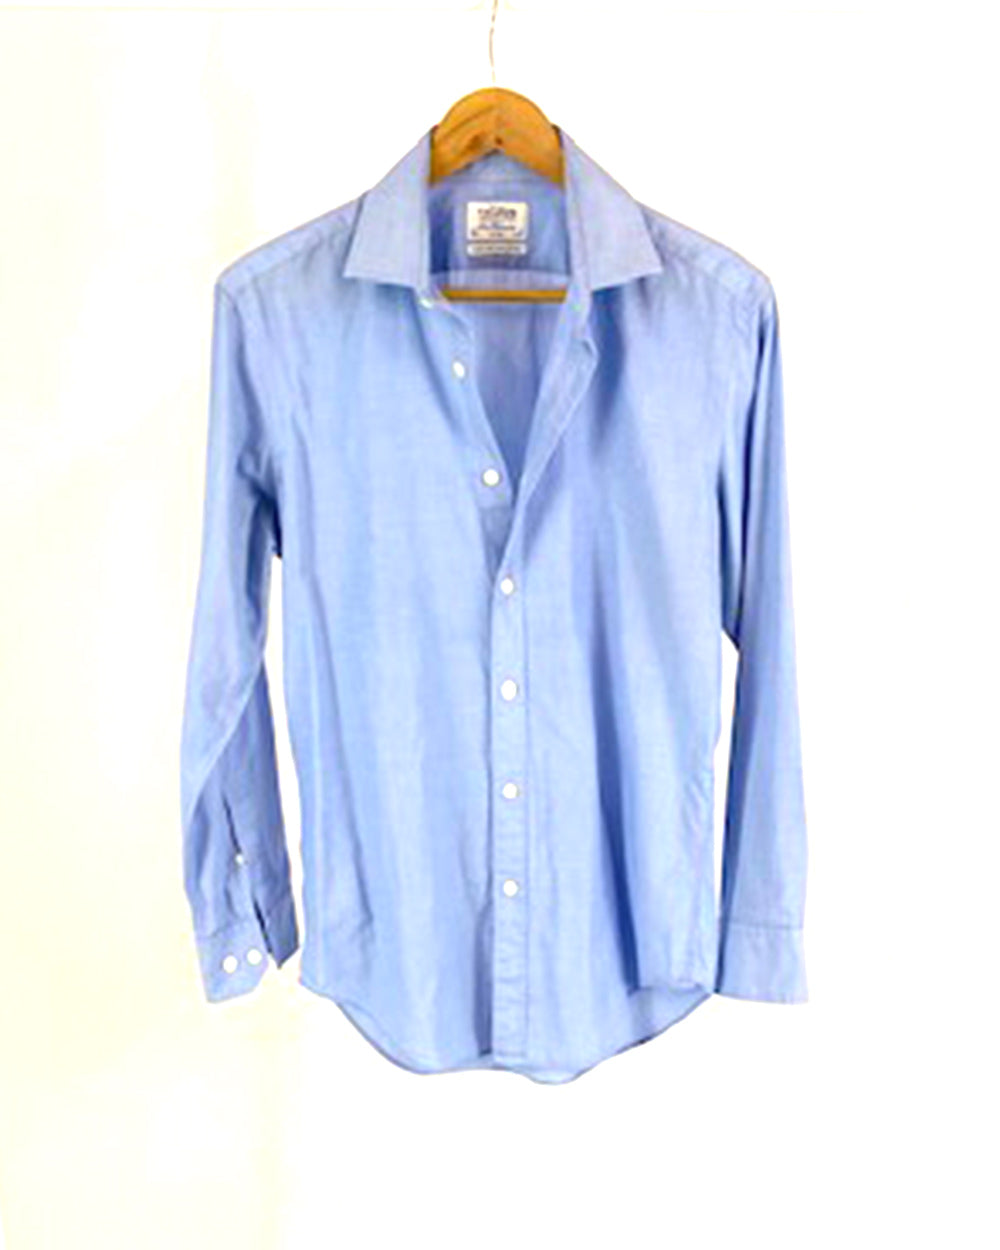 TM Lewin Blue Cotton Shirt Fitted